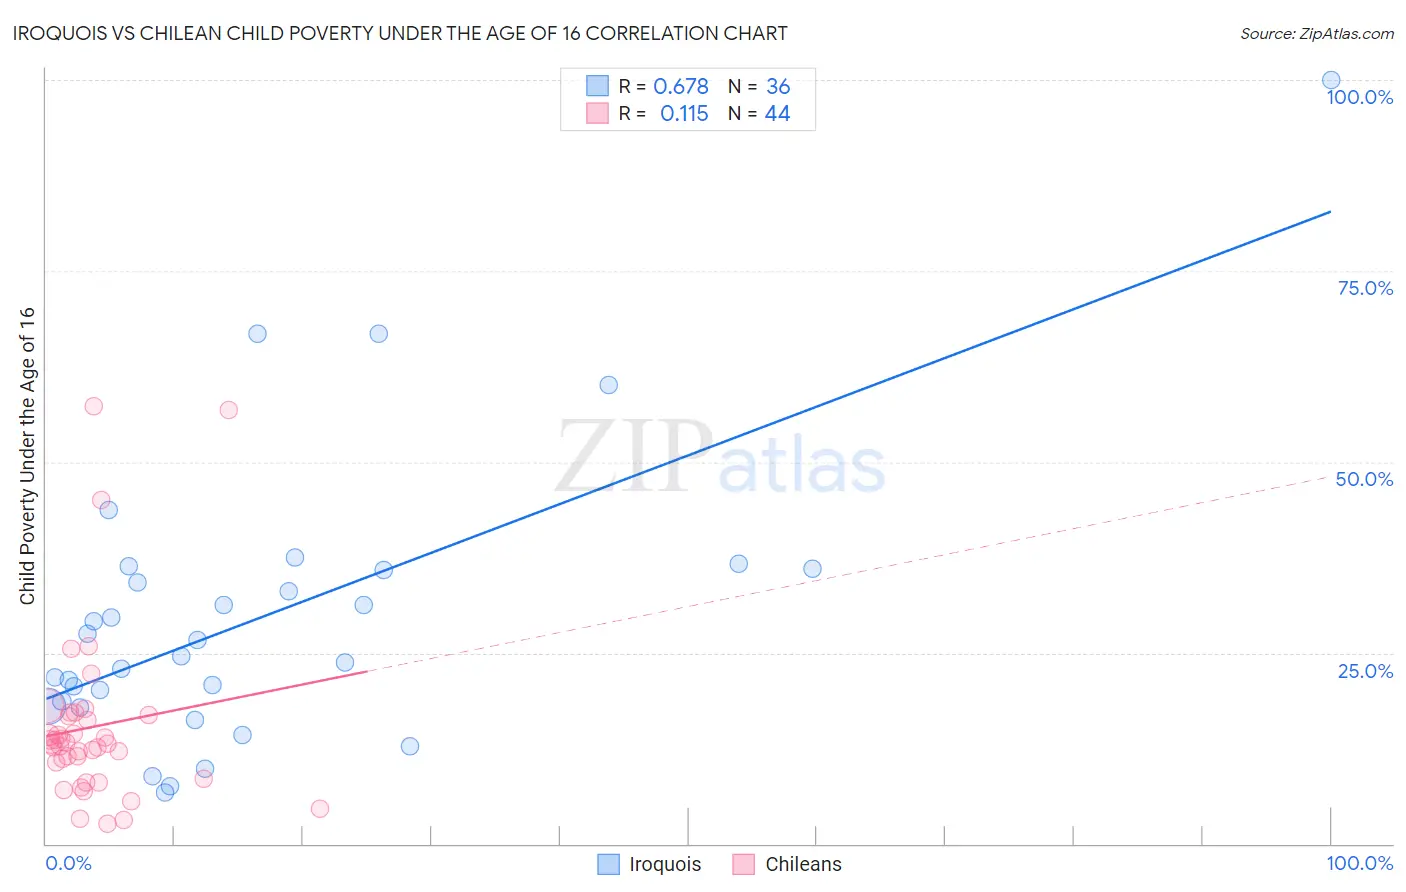 Iroquois vs Chilean Child Poverty Under the Age of 16